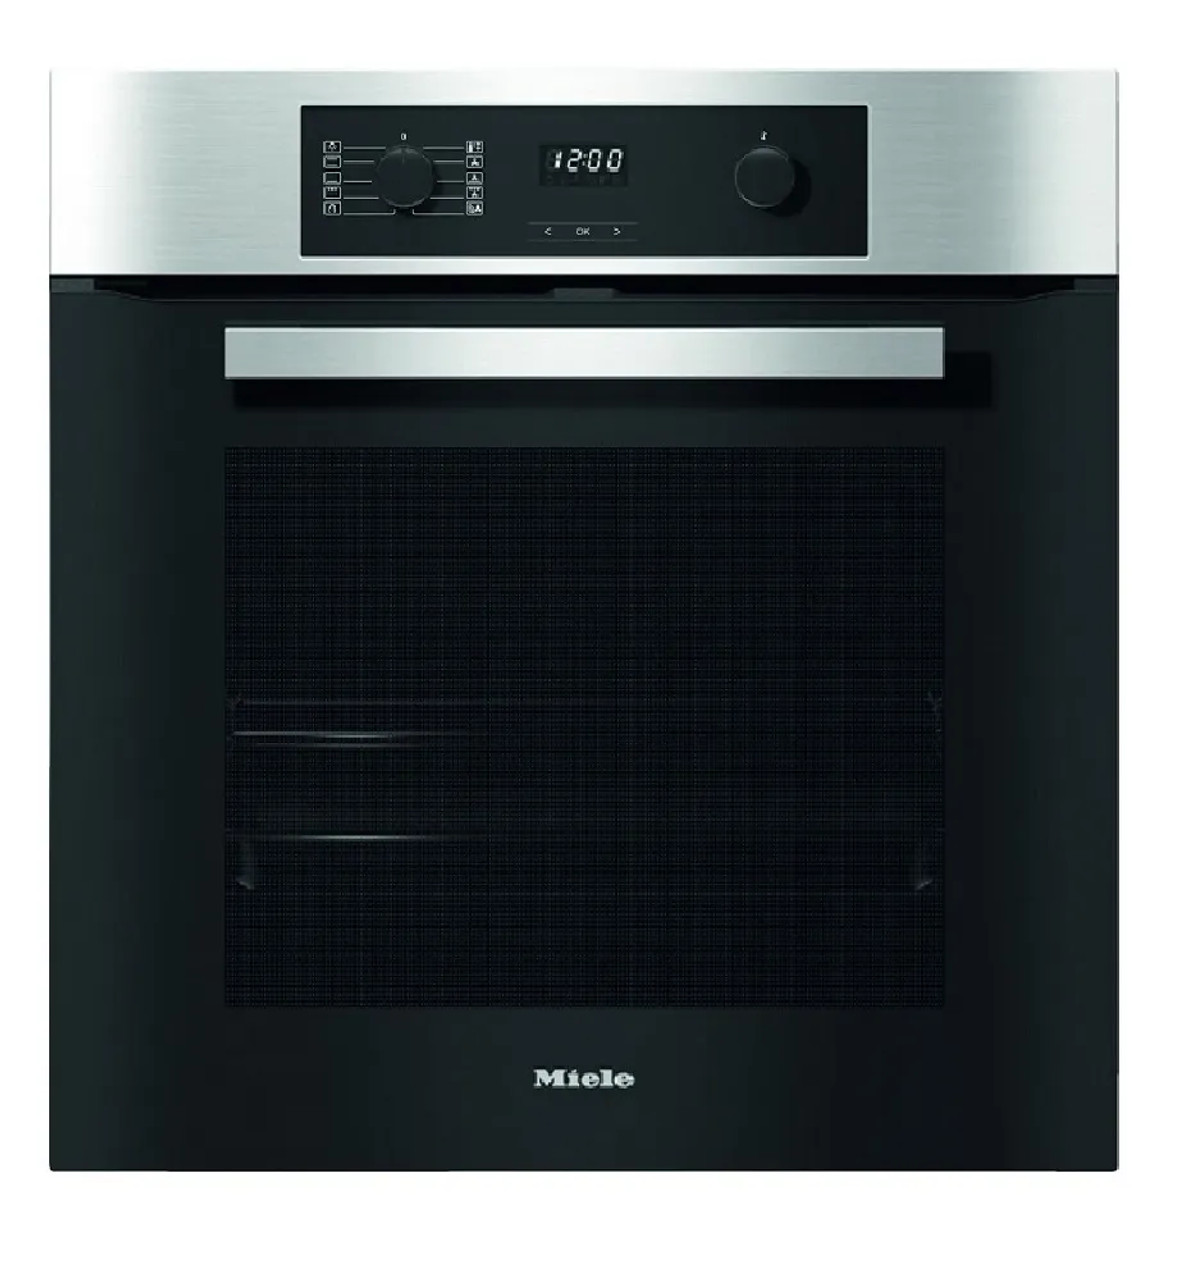  H22671BPcs - 60cm Oven with Pyrolytic Cleaning - Stainless steel